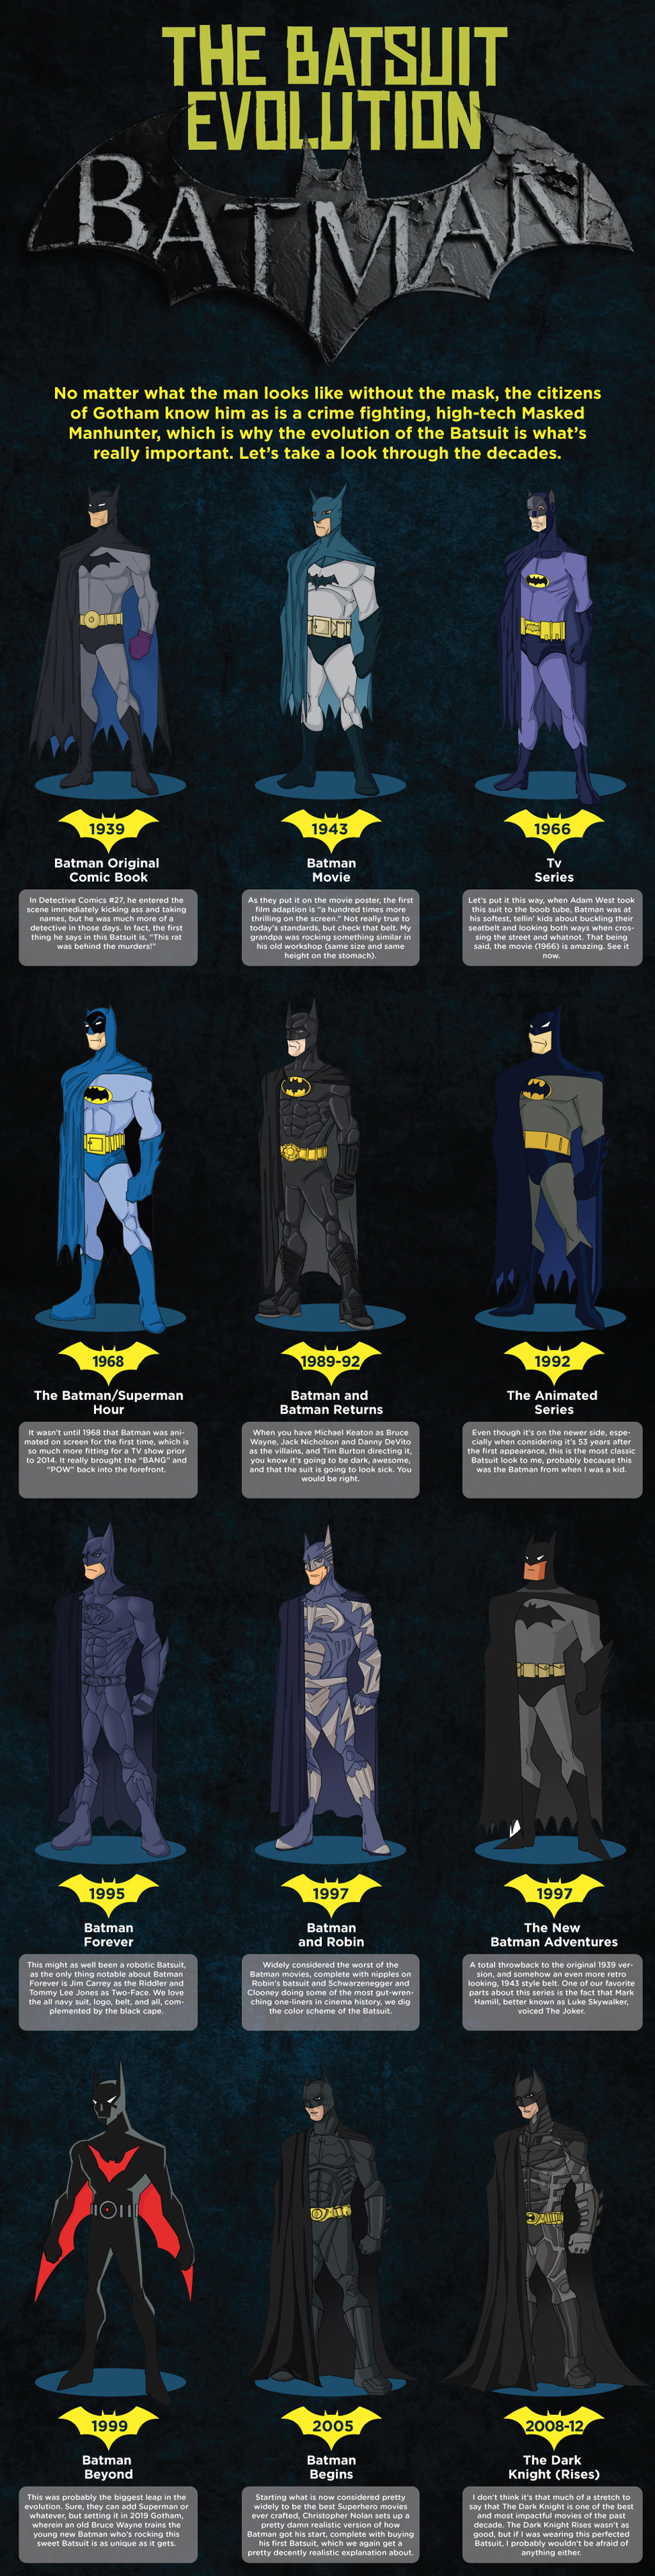 The Batsuit Evolution by Stork Weekly